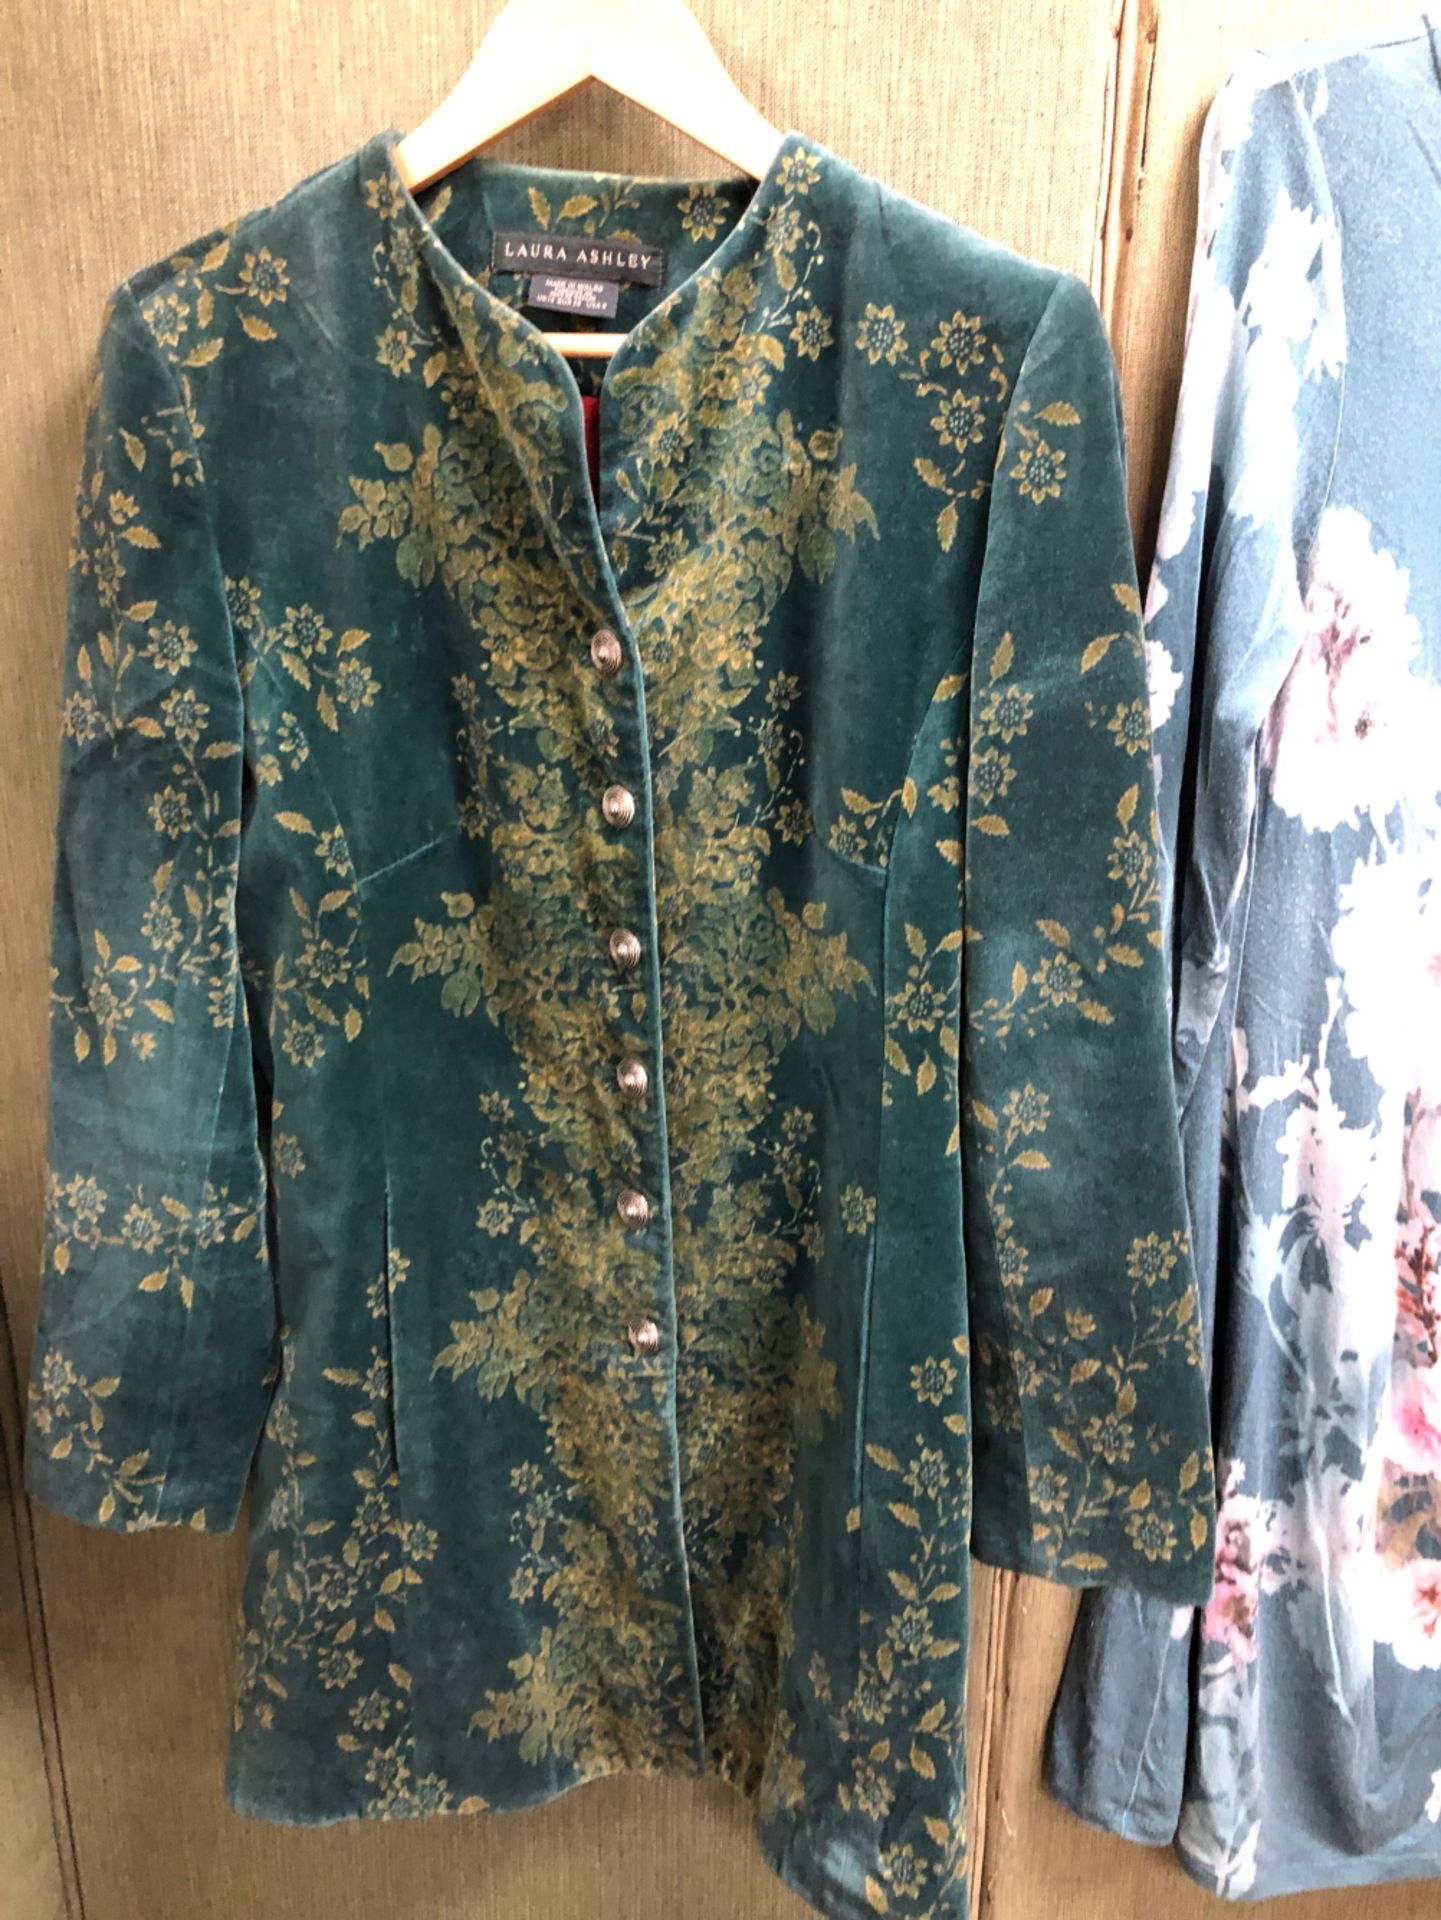 A LAURA ASHLEY GREEN JACKET WITH FLORAL DESIGN UK SIZE 12, TOGETHER WITH A LAURA ASHLEY FLORAL DRESS - Image 5 of 12